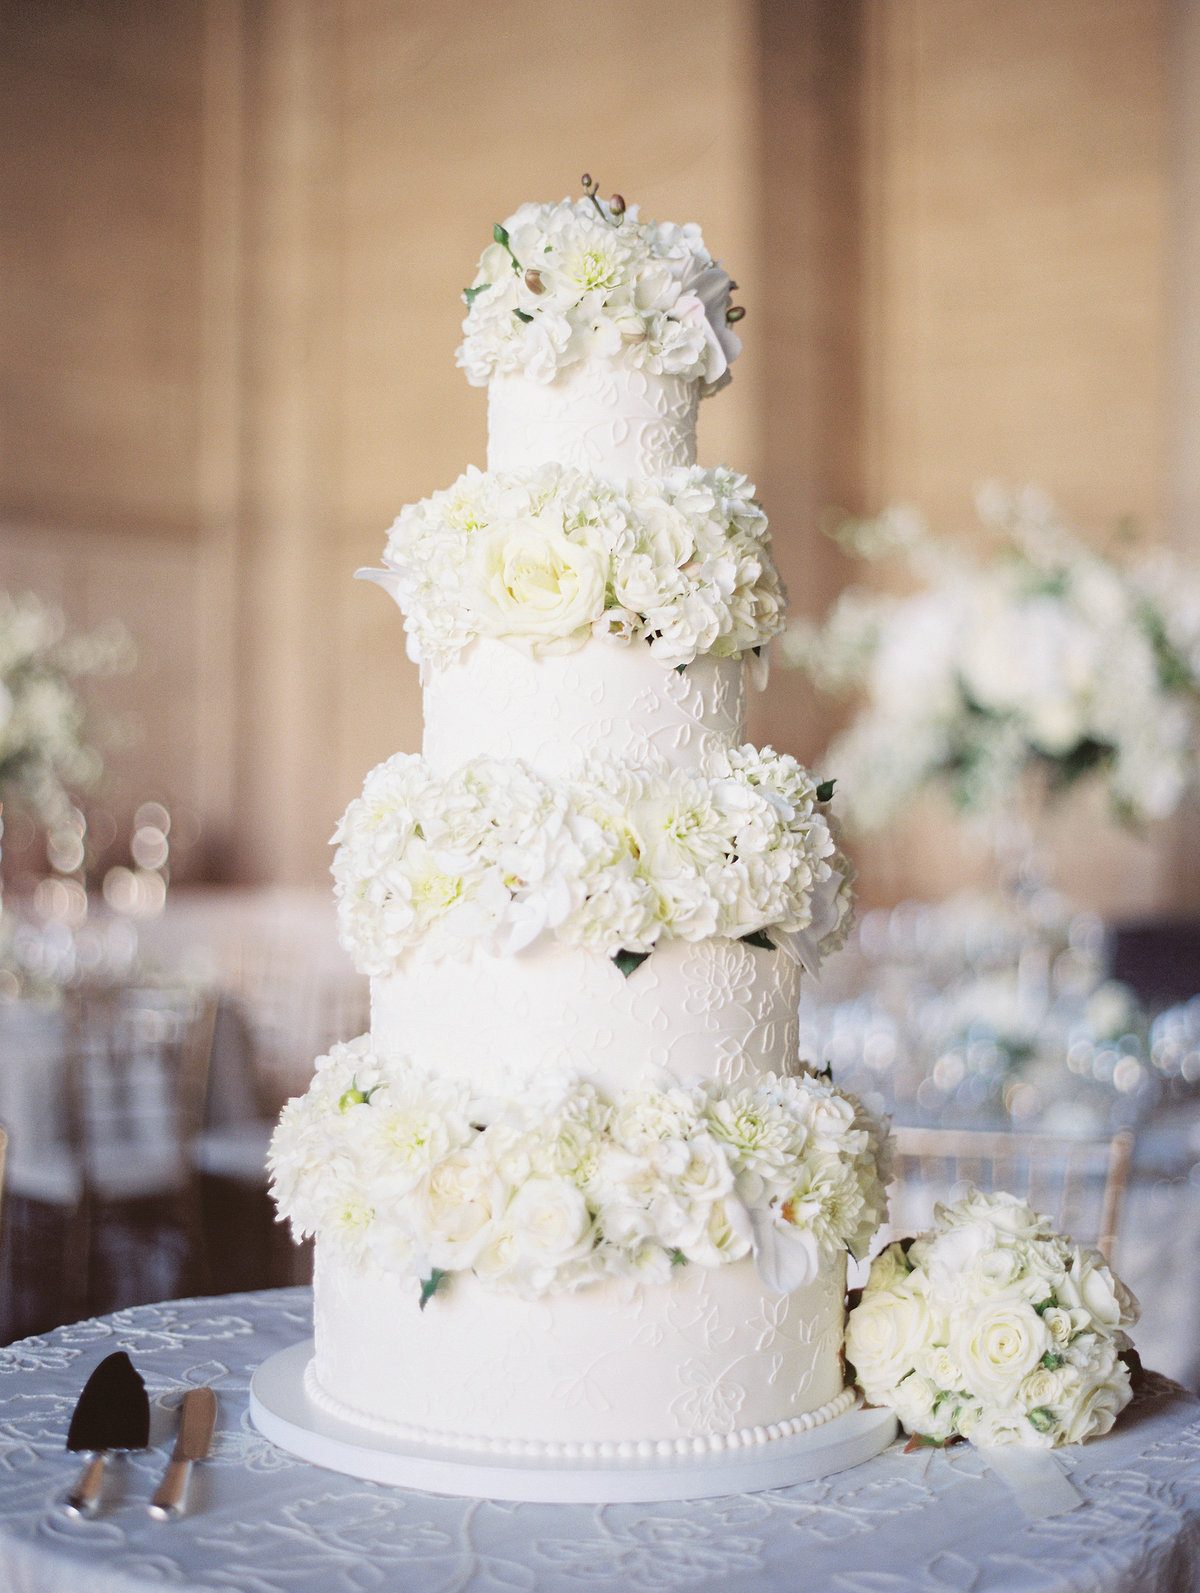 Cake for wedding by Jenny Schneider Events at the Asian Art Museum in San Francisco, California. Photo by Lori Paladino Photography.